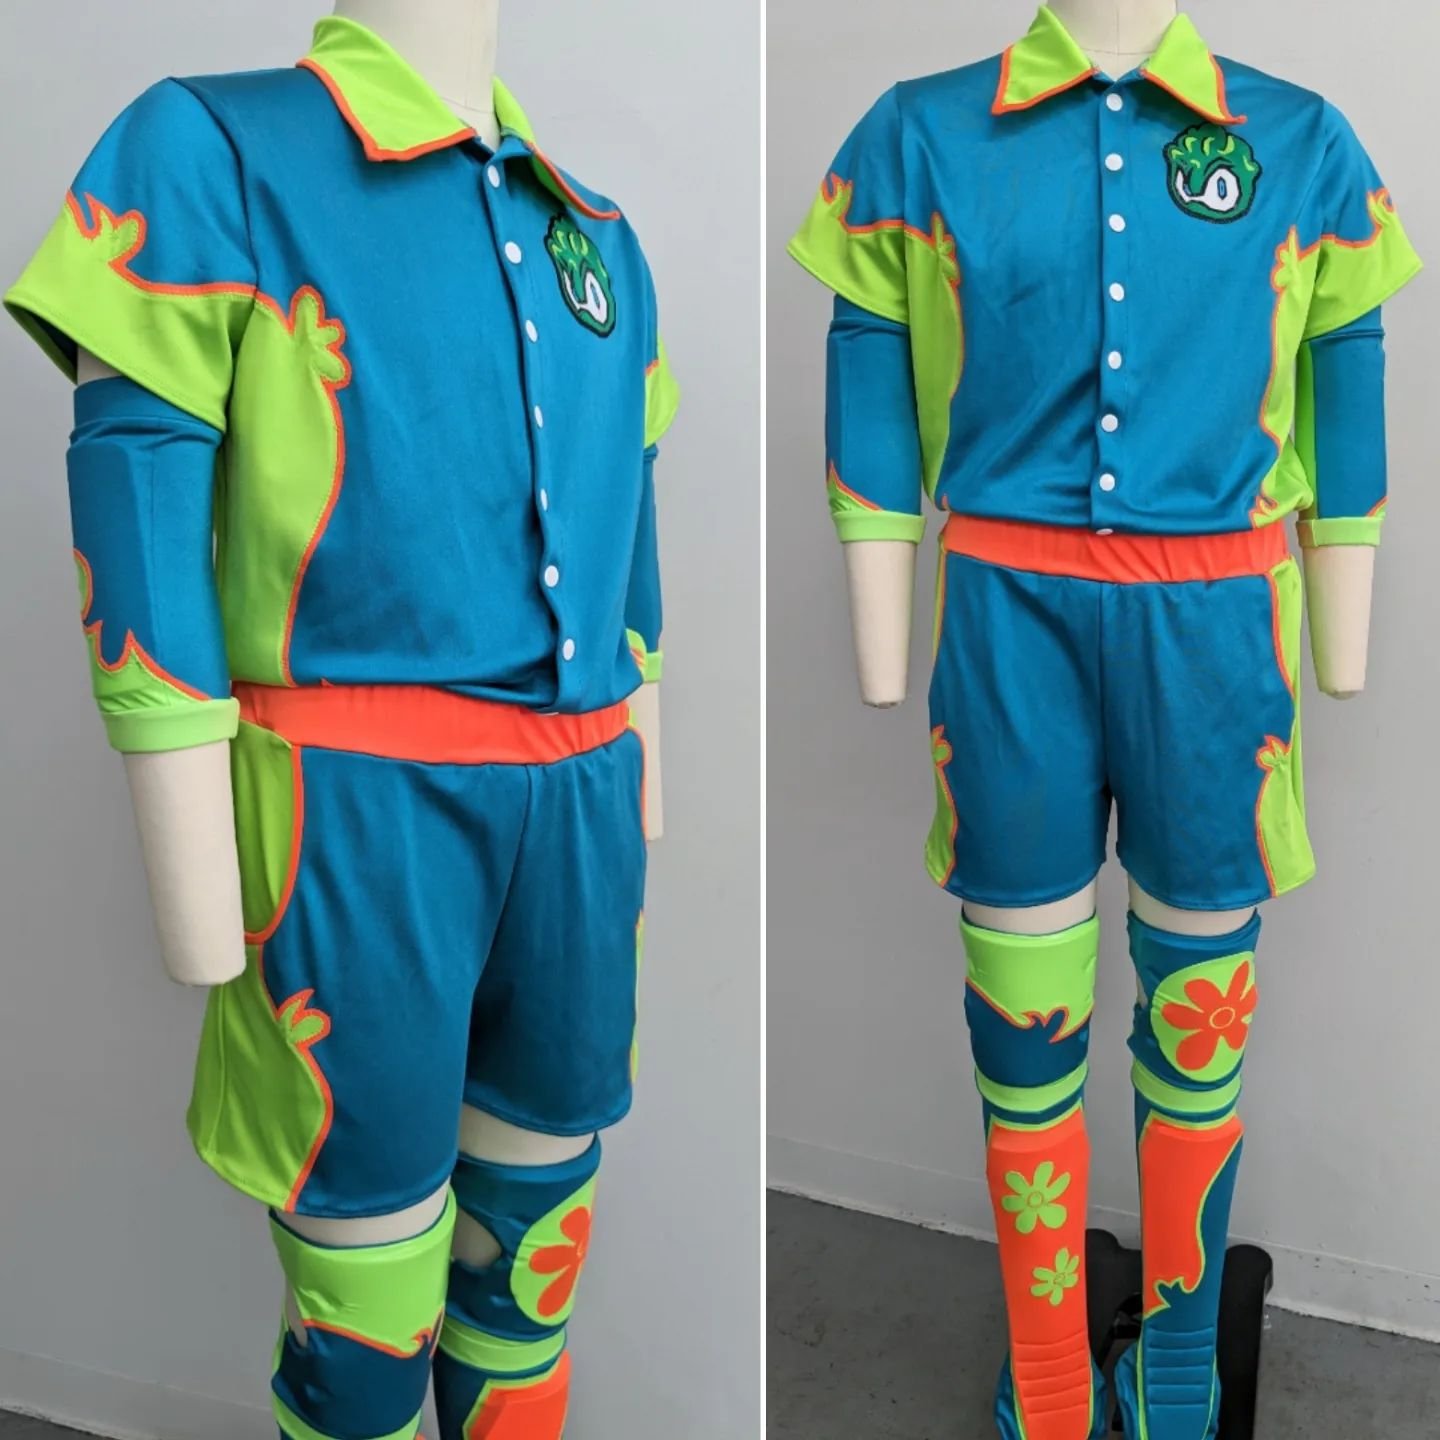 We had so much fun creating this Scooby Doo inspired set for @drodooby ! The romper, knee pads, kick pads, elbow pads and bucket hat came together so well with the Mystery Machine theme!! 
💙💚🧡💚💙
#prowrestlinggear #customwrestlinggear #wrestlingg